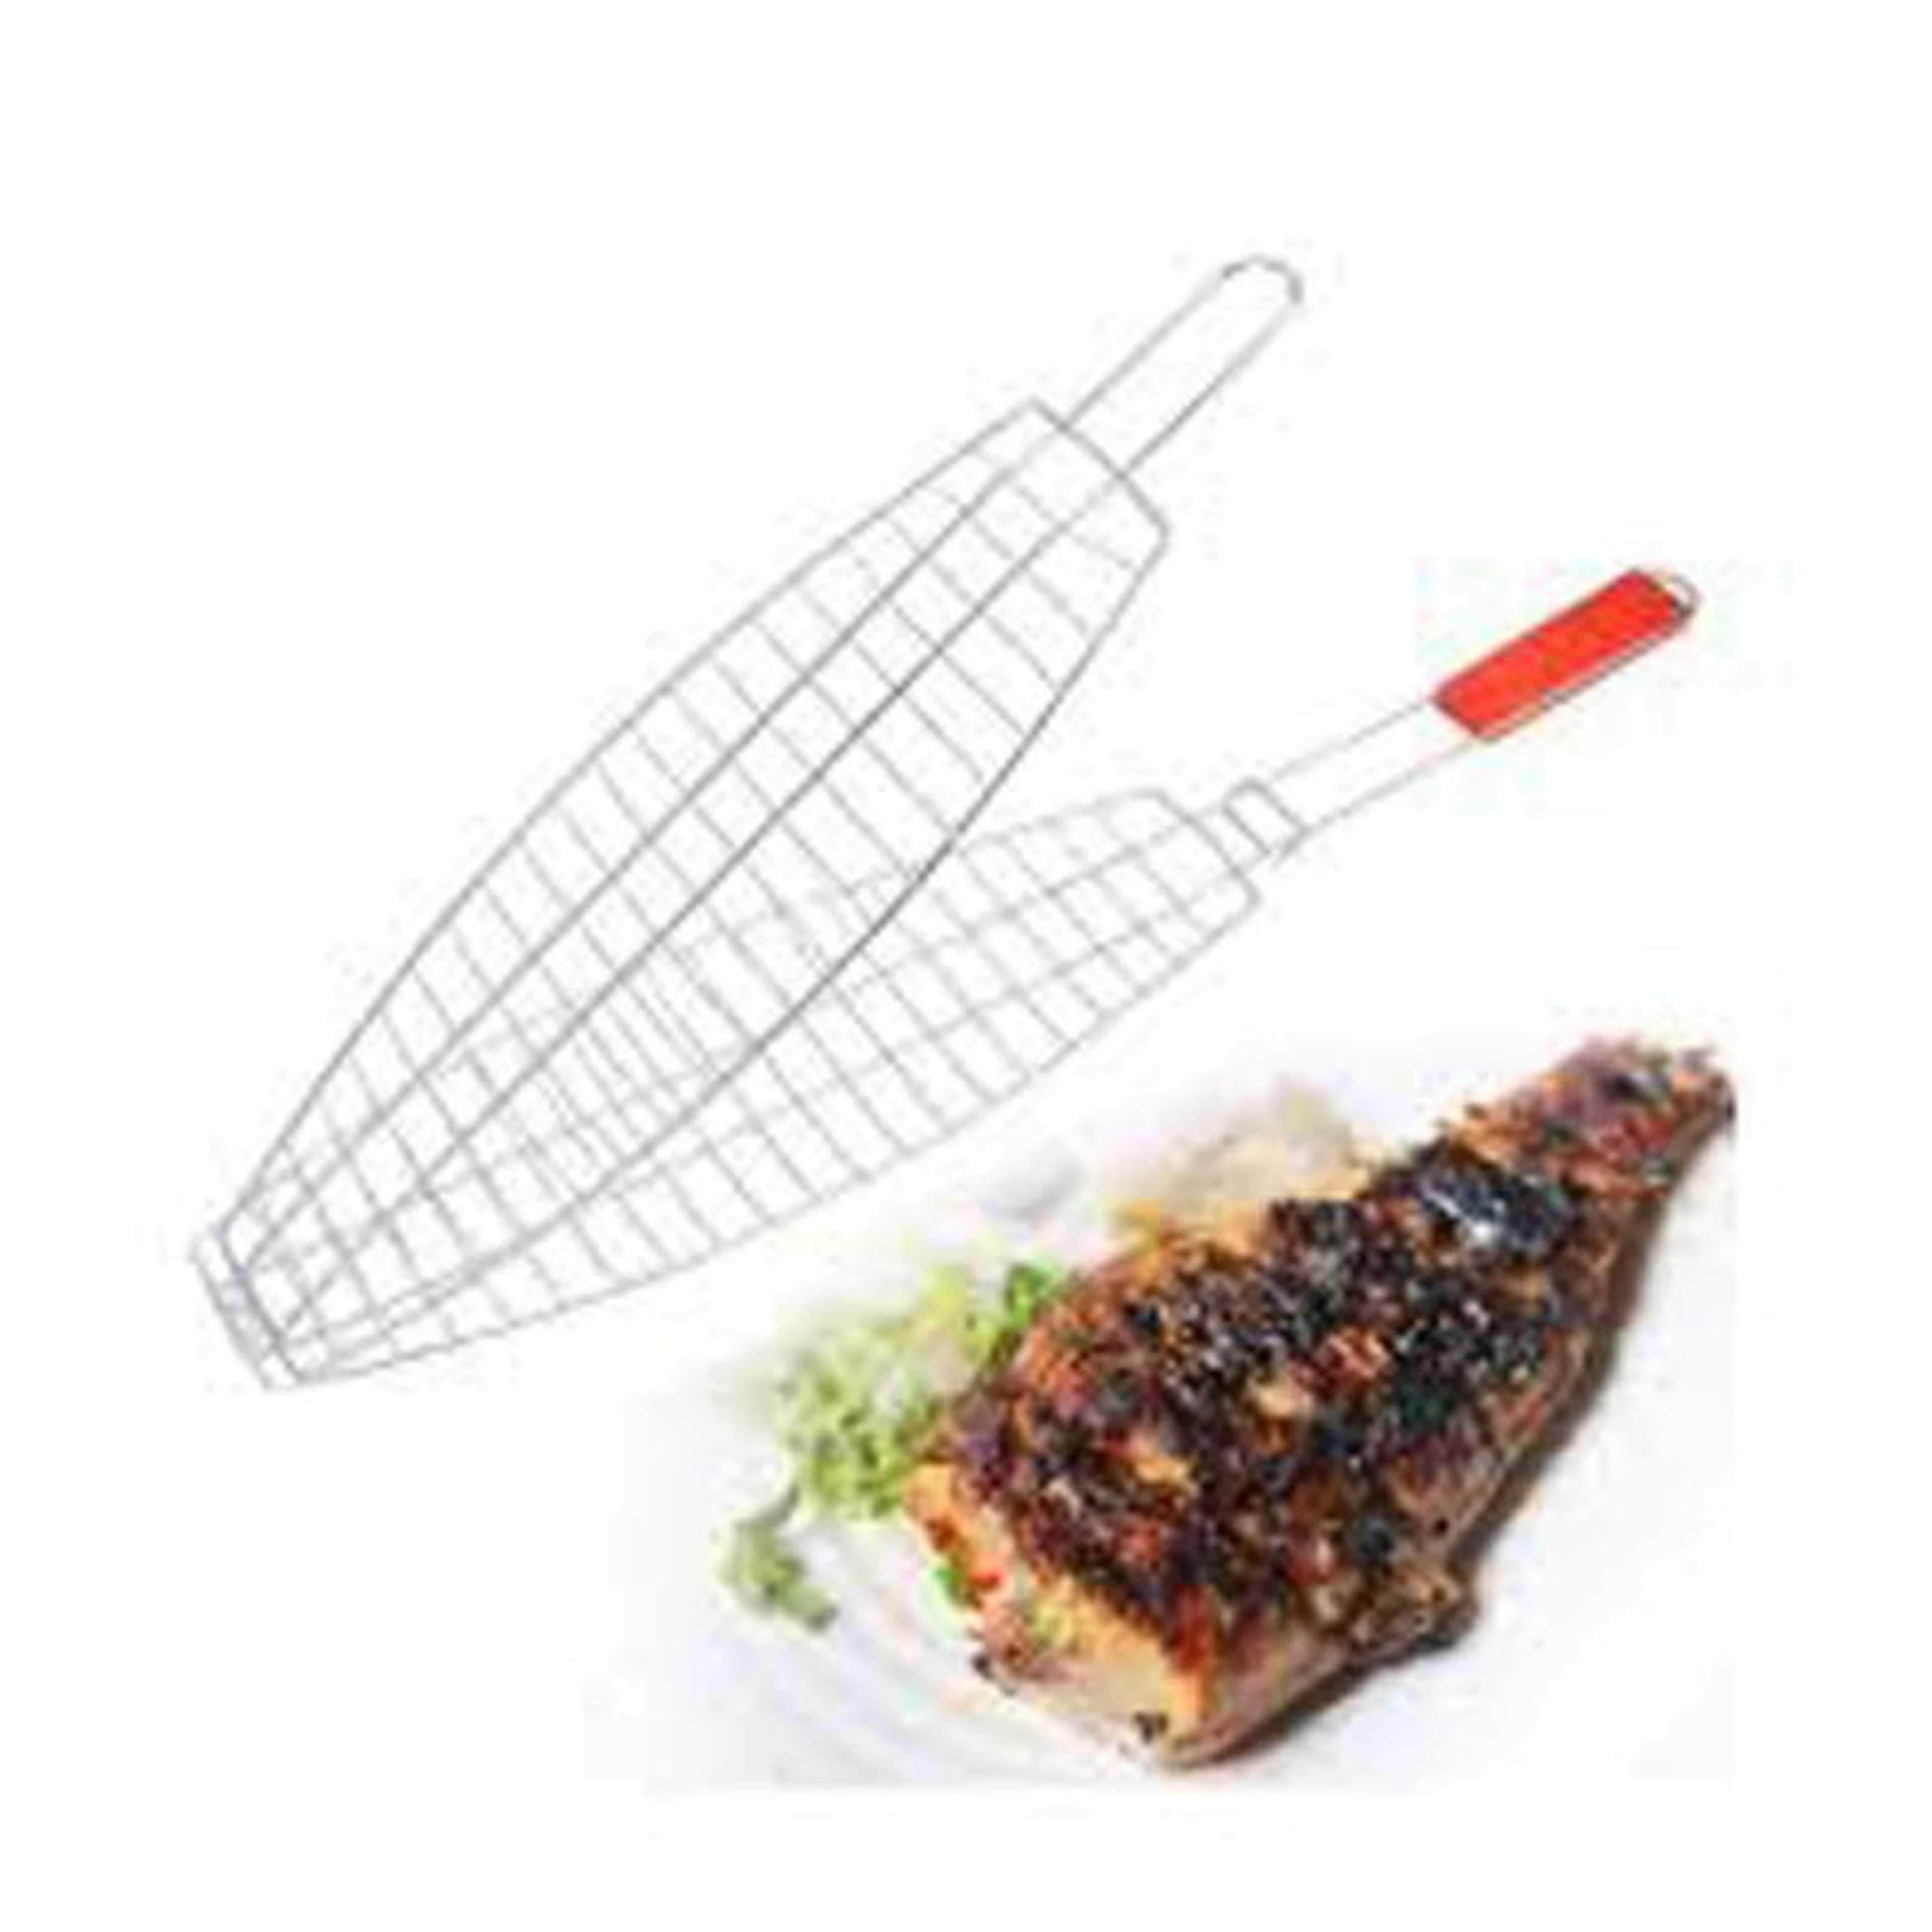 Stainless Steel Fish Grill Basket, Long Wooden Handle, BBQ Smoking Charcoal Grilling Roast Baskets